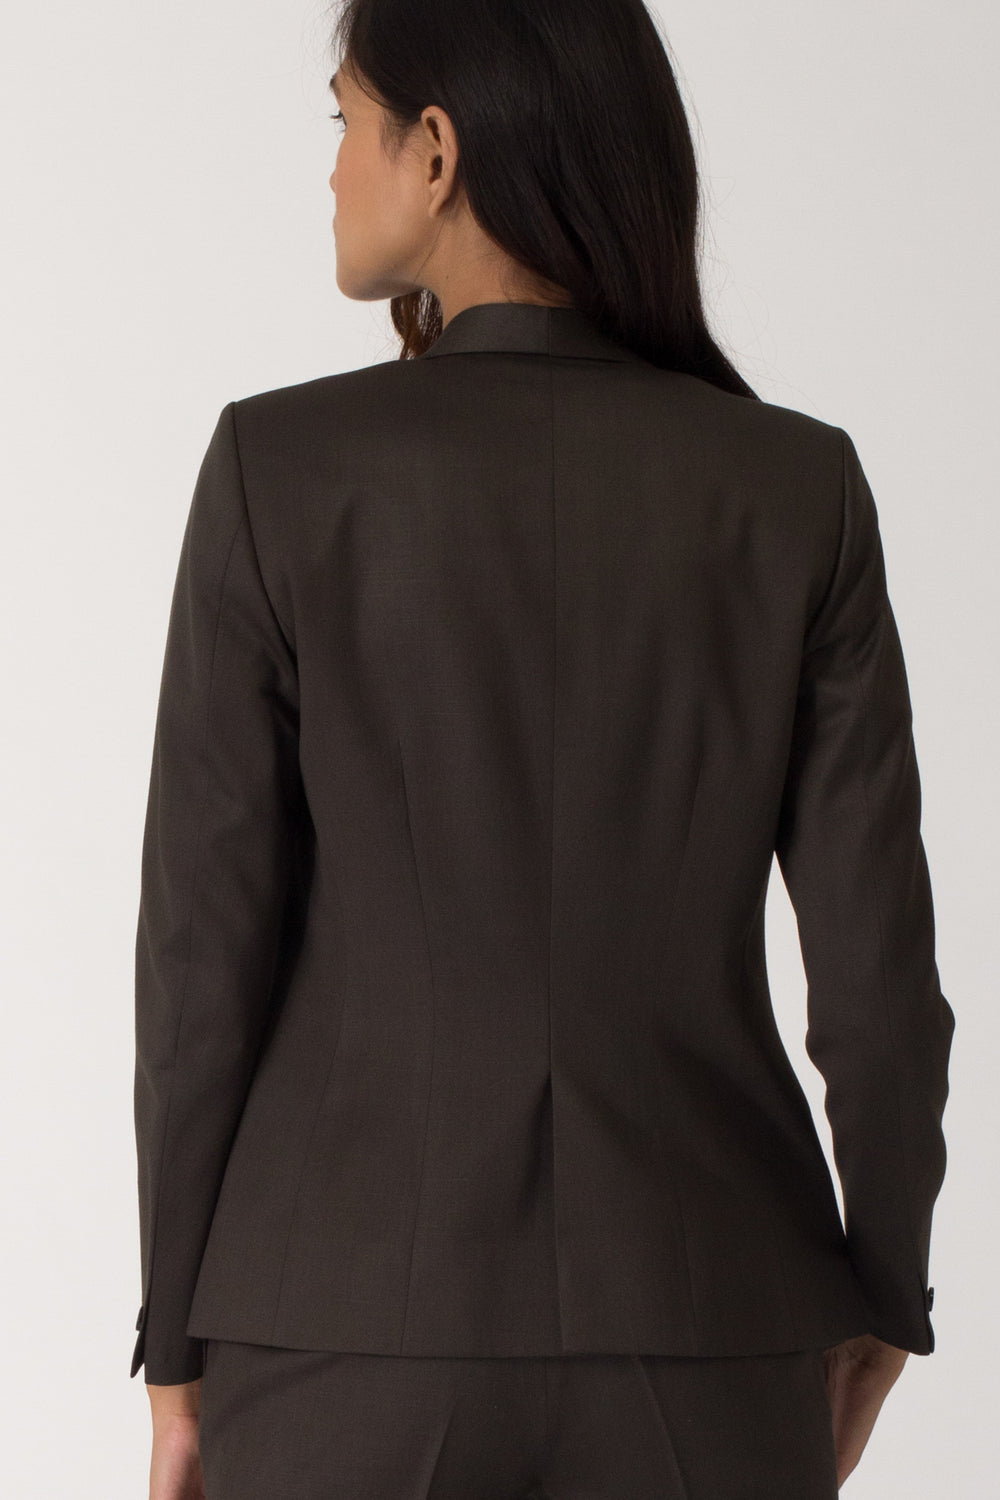 Dark Green Formal Blazer Suit for Working Women. Shop for stylish office suits and professional looks at www.intermod.in